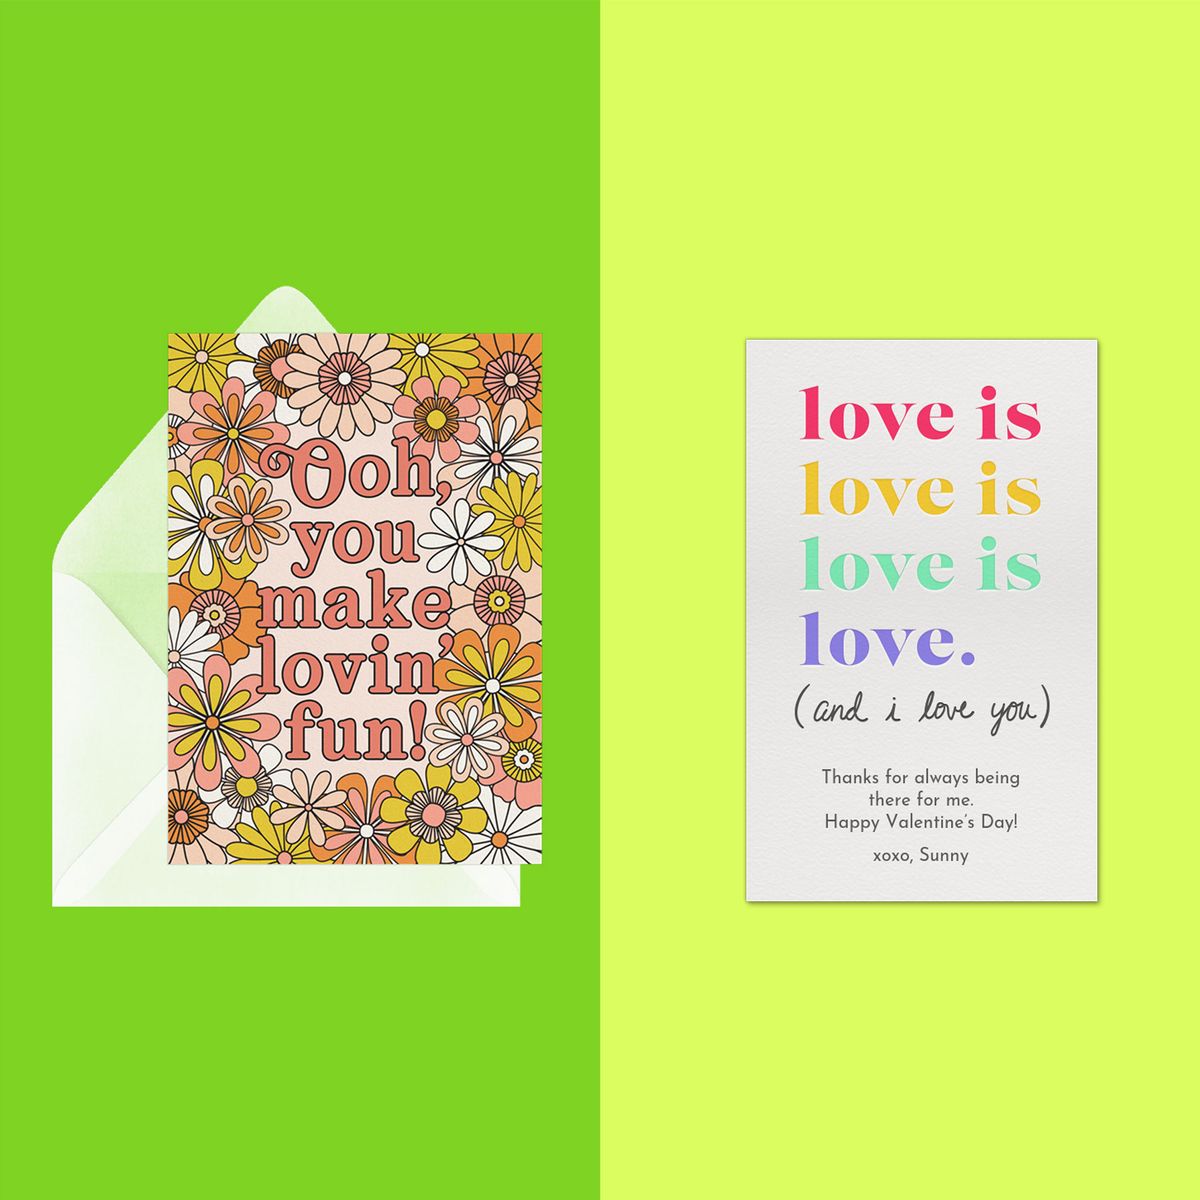 SHOPPING AT THE BOUTIQUE LOTS OF LOVE MUM COLOURFUL BIRTHDAY GREETING CARD